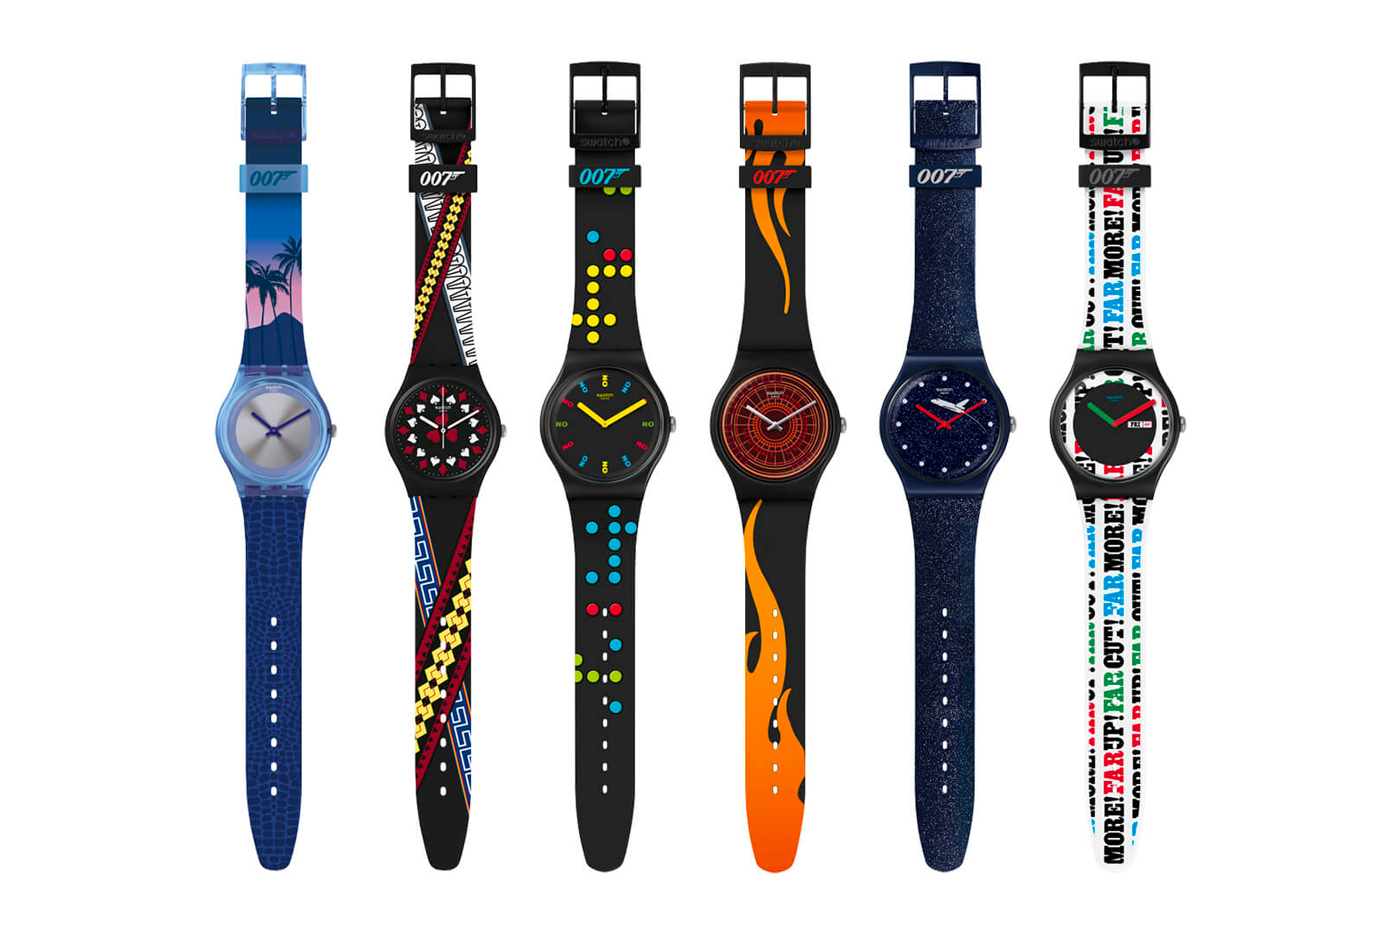 Swatch x 007 Capsule Collection